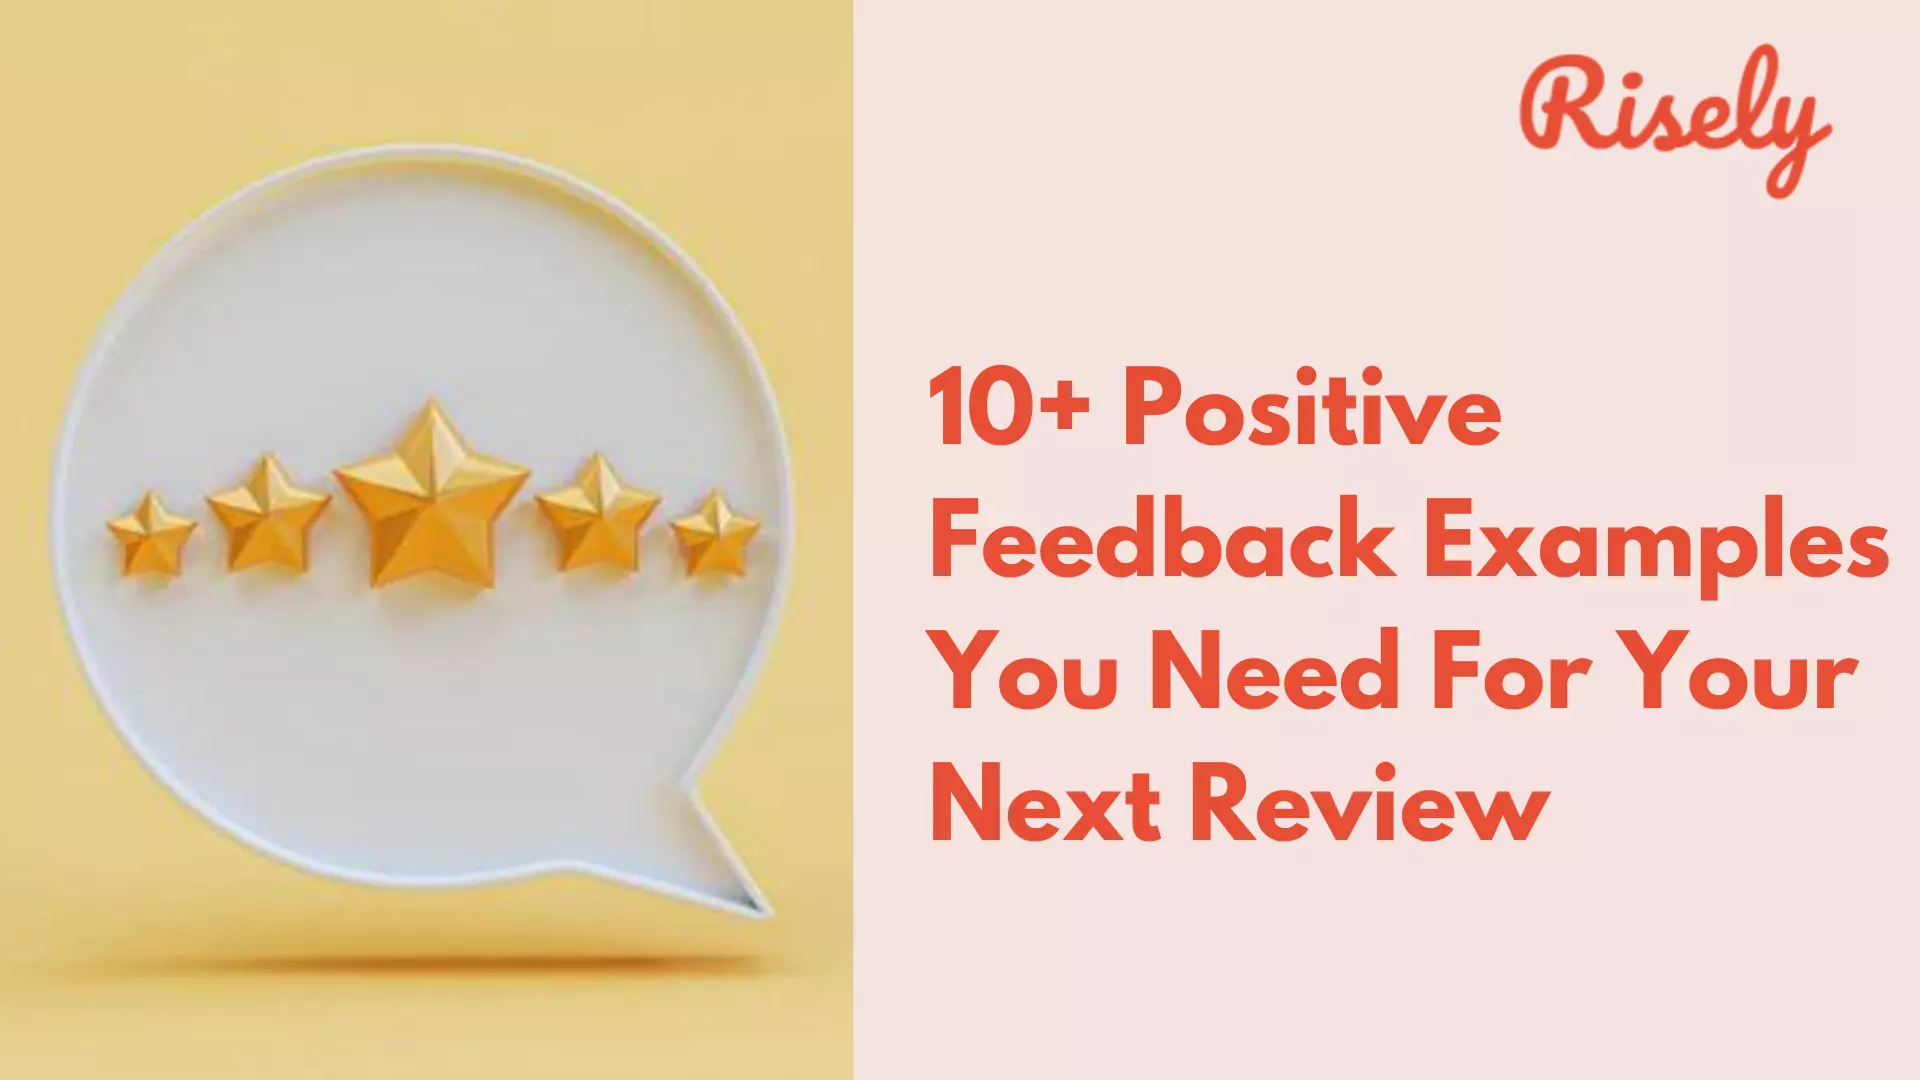 10+ Positive Feedback Examples You Need For Your Next Review